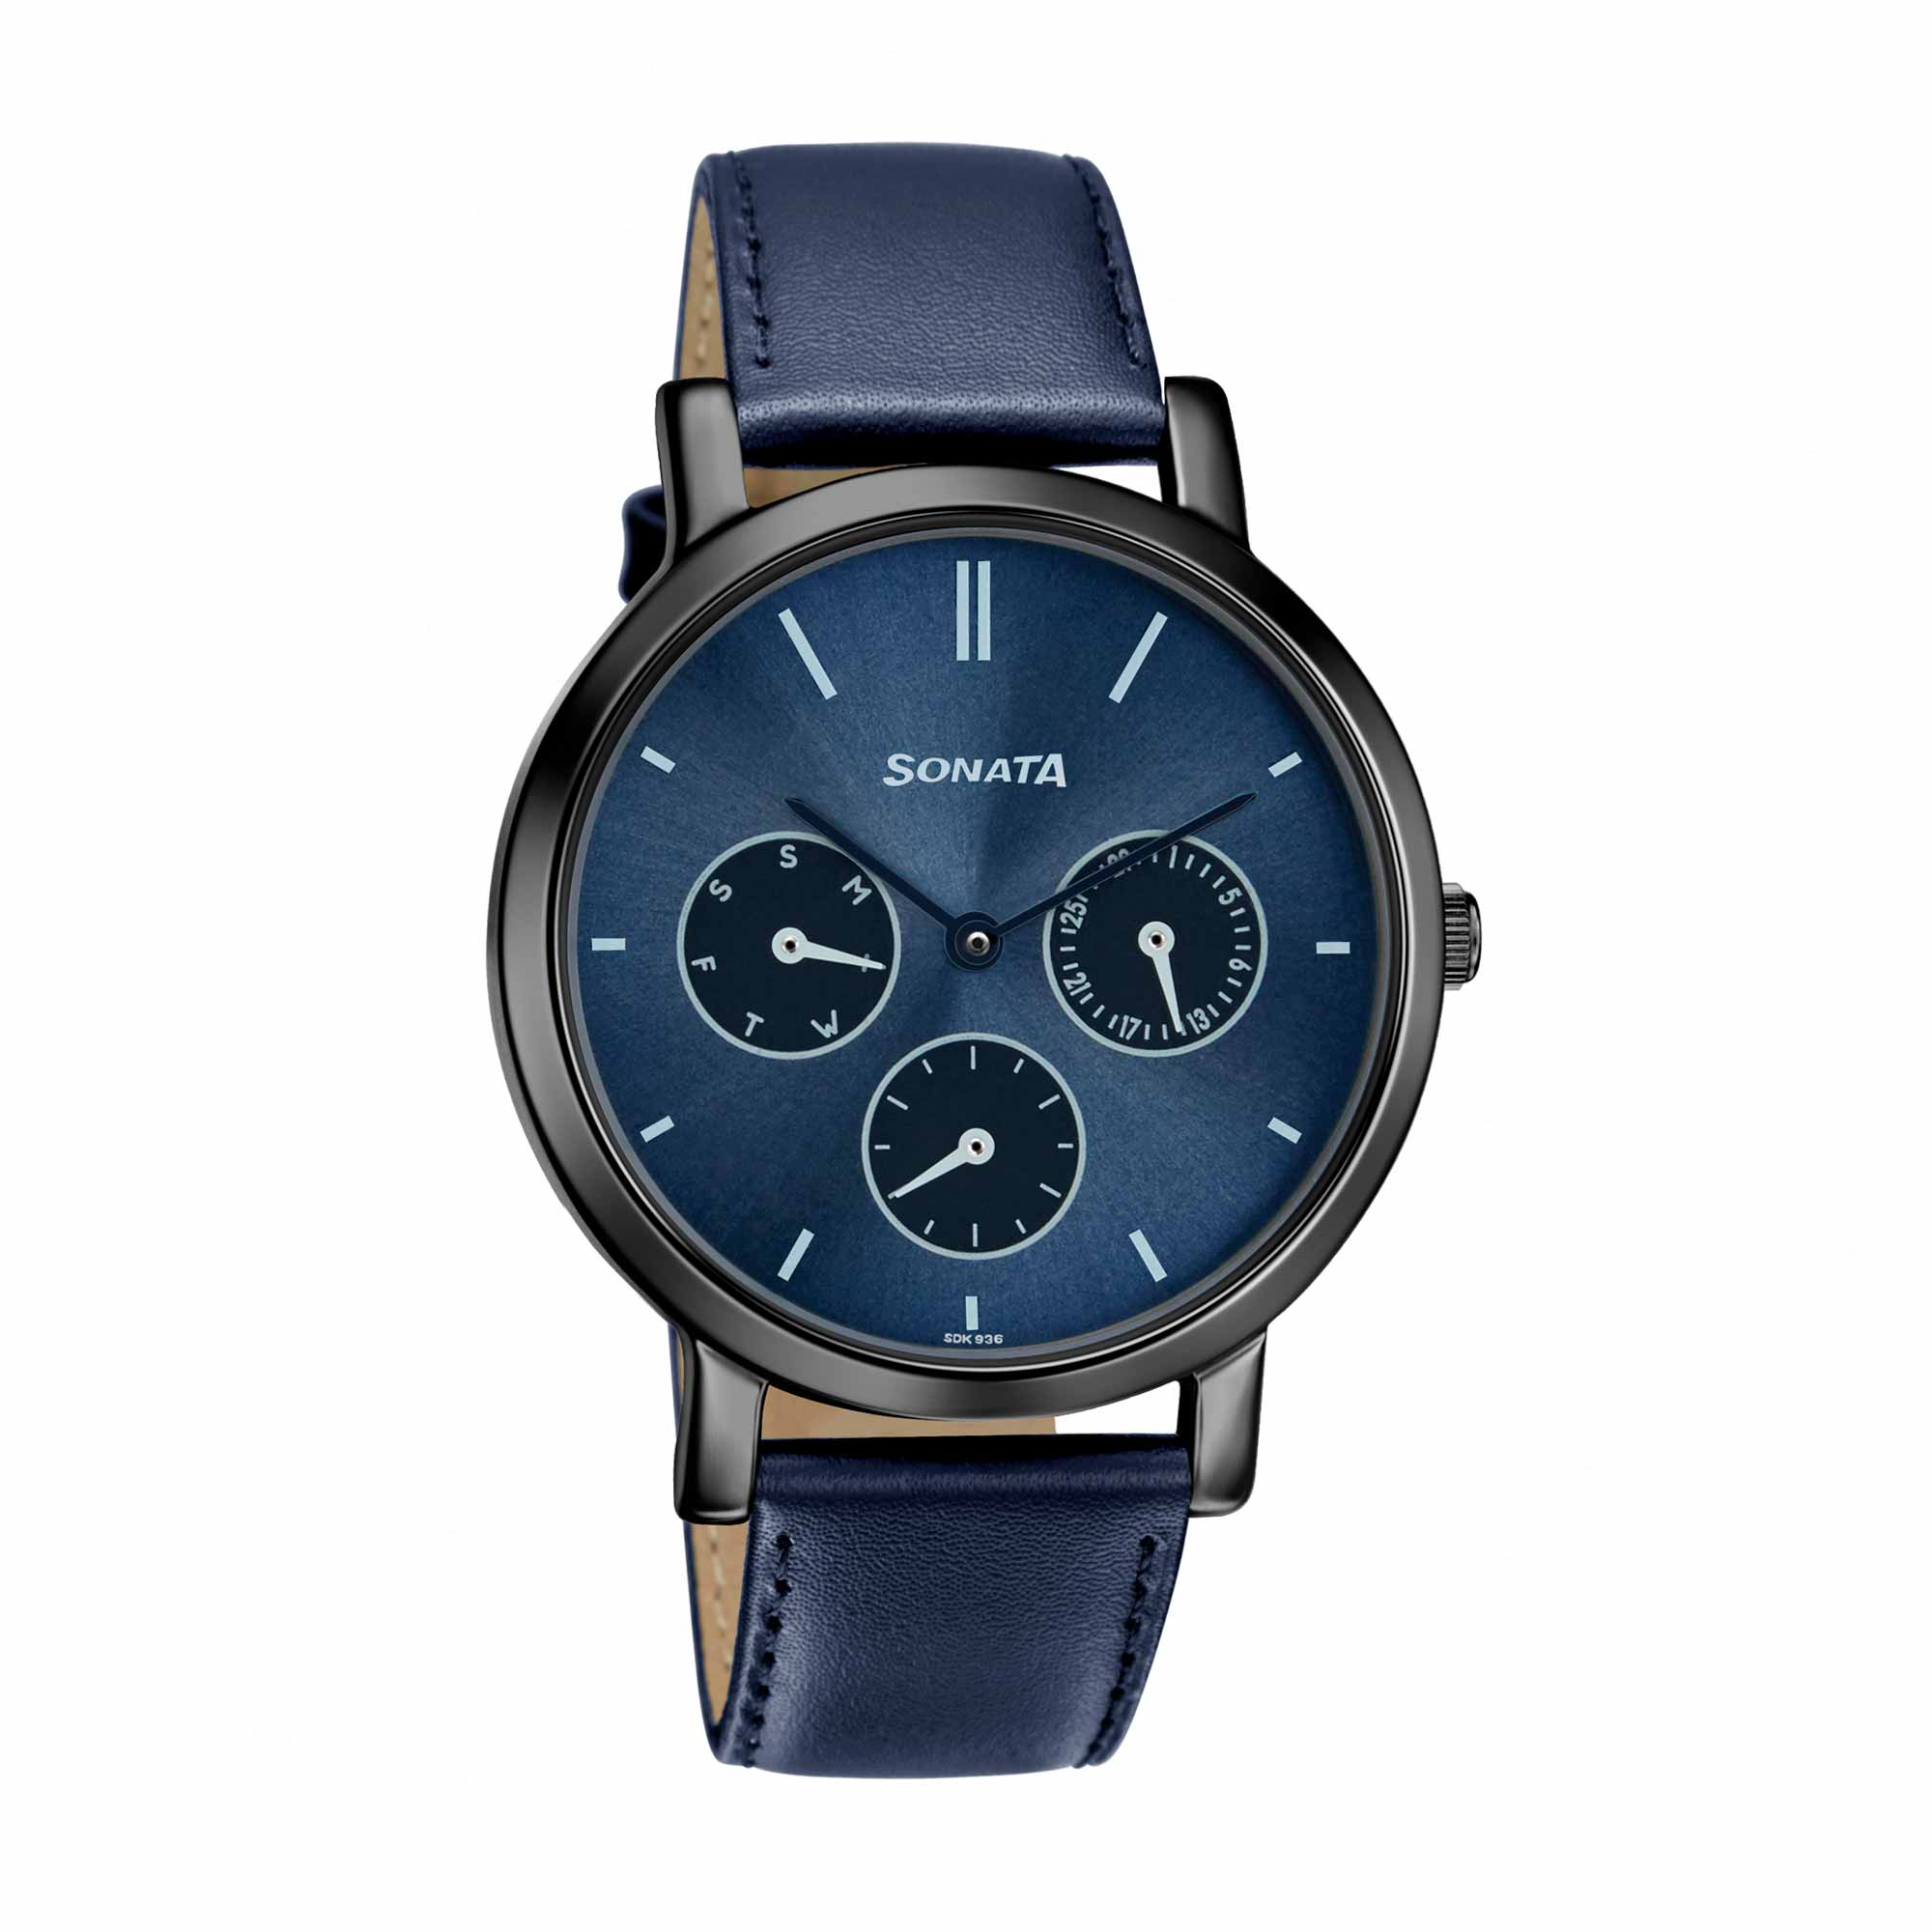 Sonata Multifunctions Blue Dial Women Watch With Leather Strap